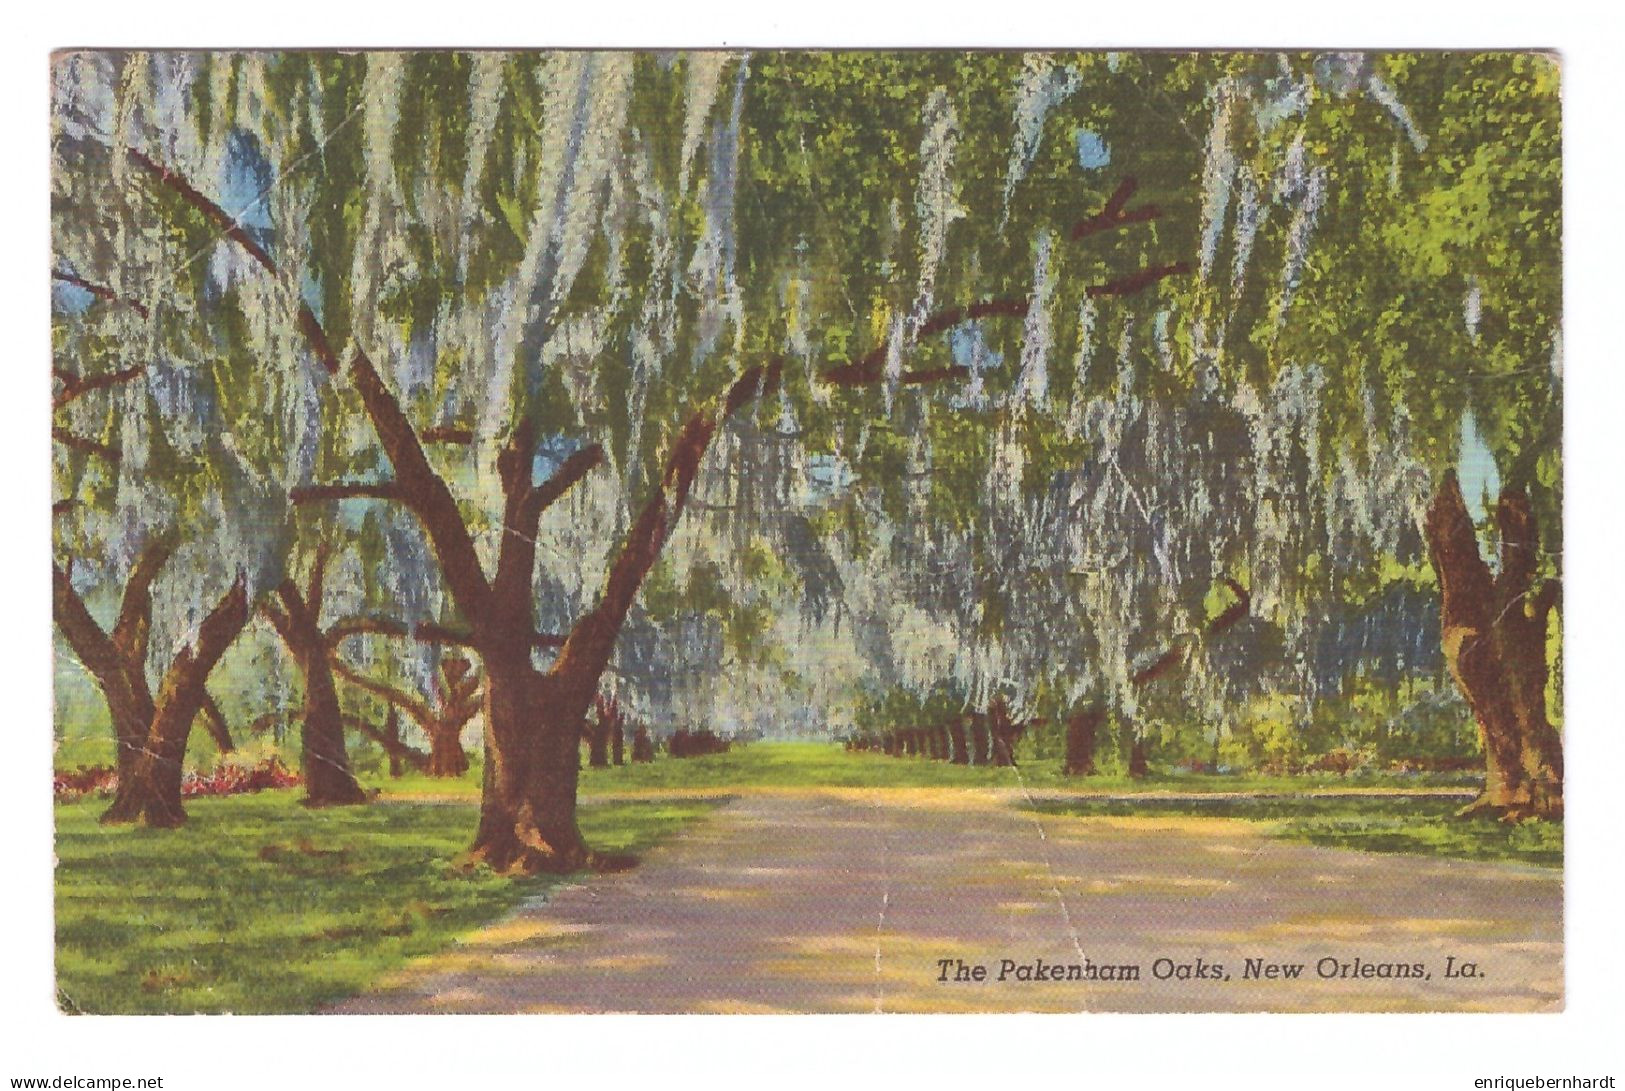 UNITED STATES // THE PAKENHAM OAKS (ALSO KNOWN AS THE CATHEDRAL OF OAKS) - New Orleans